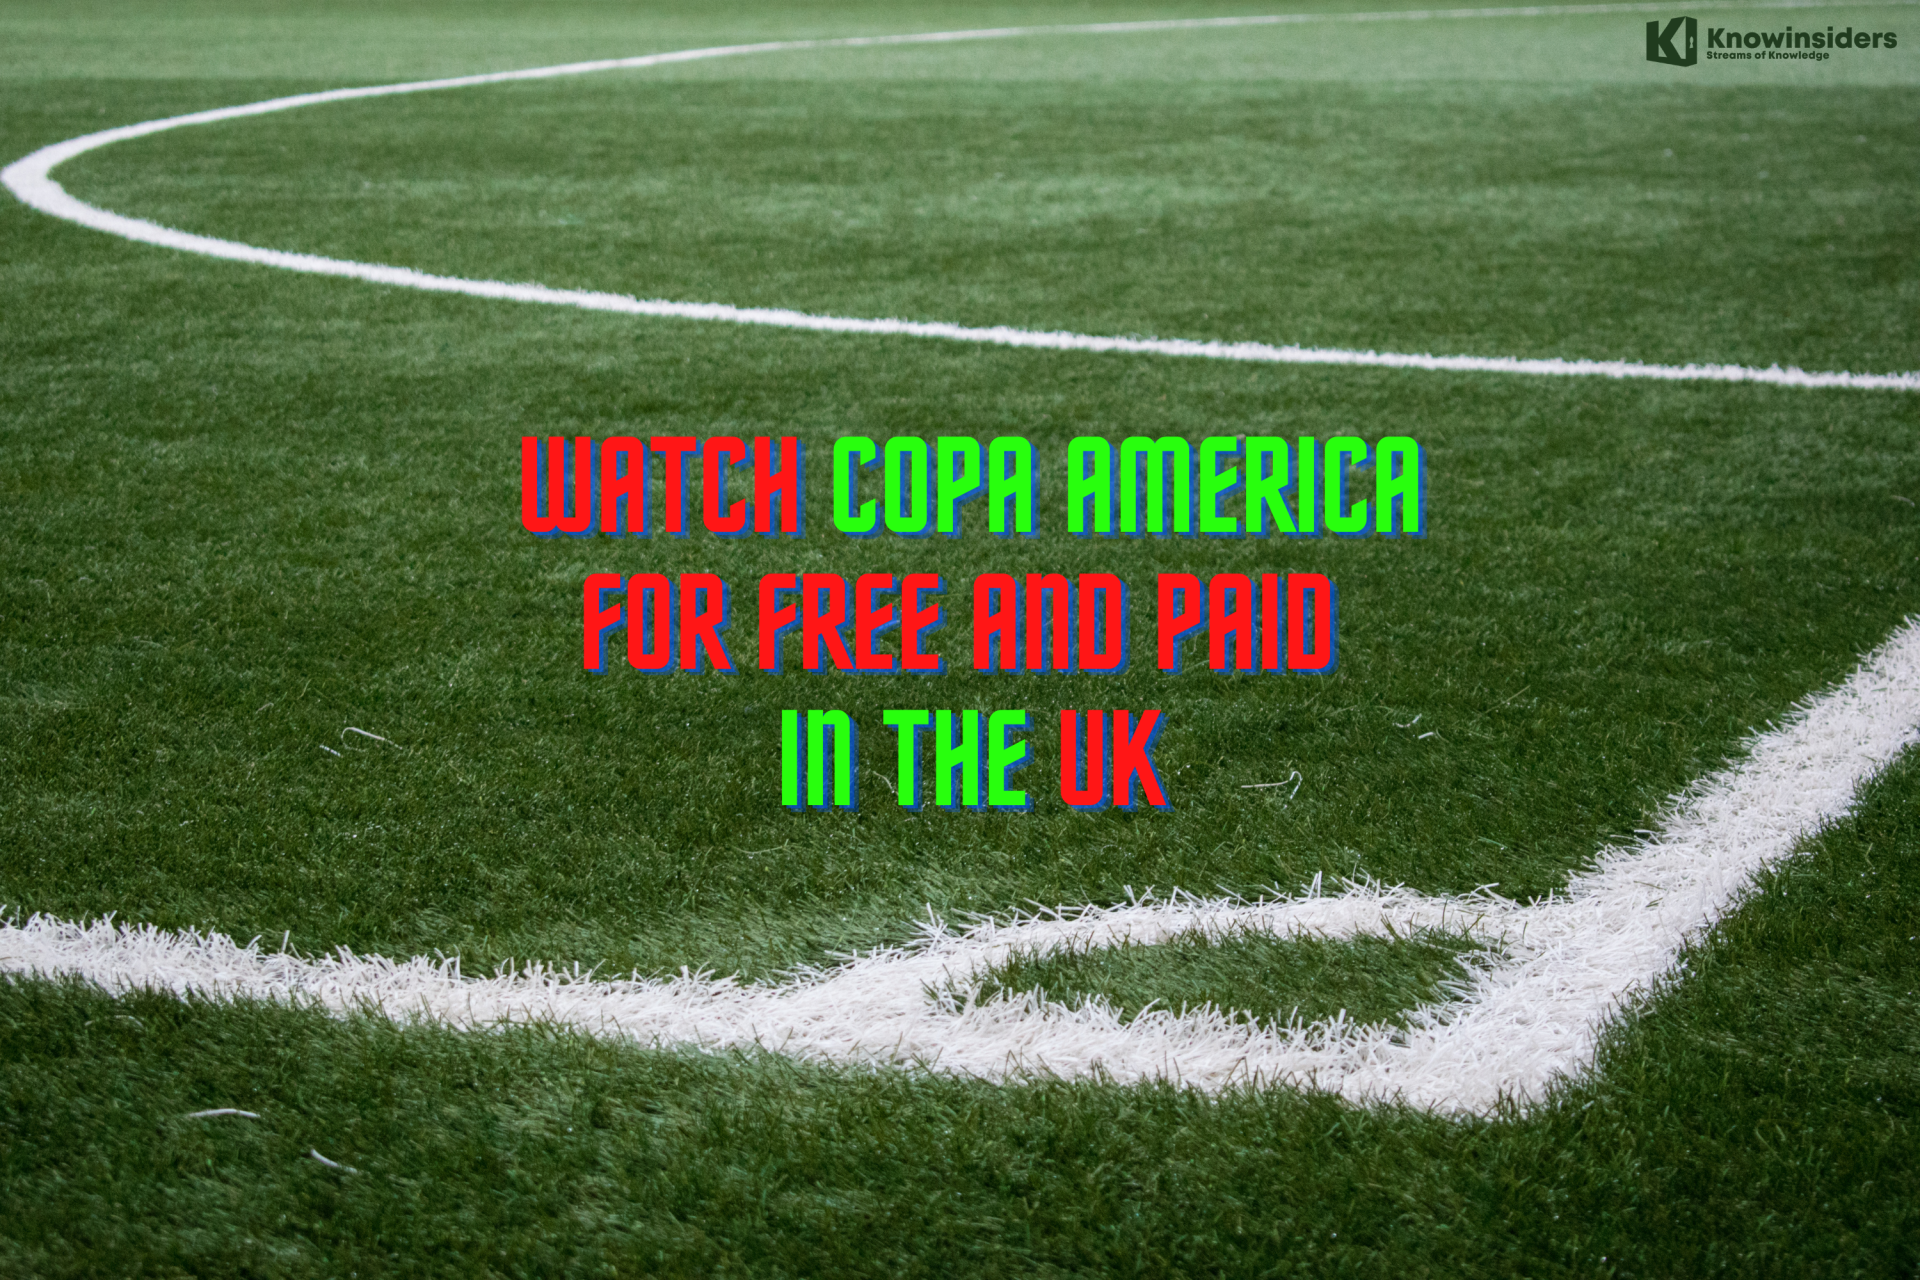 Watch Copa America from UK for Free - Live Stream, Online, TV Channel